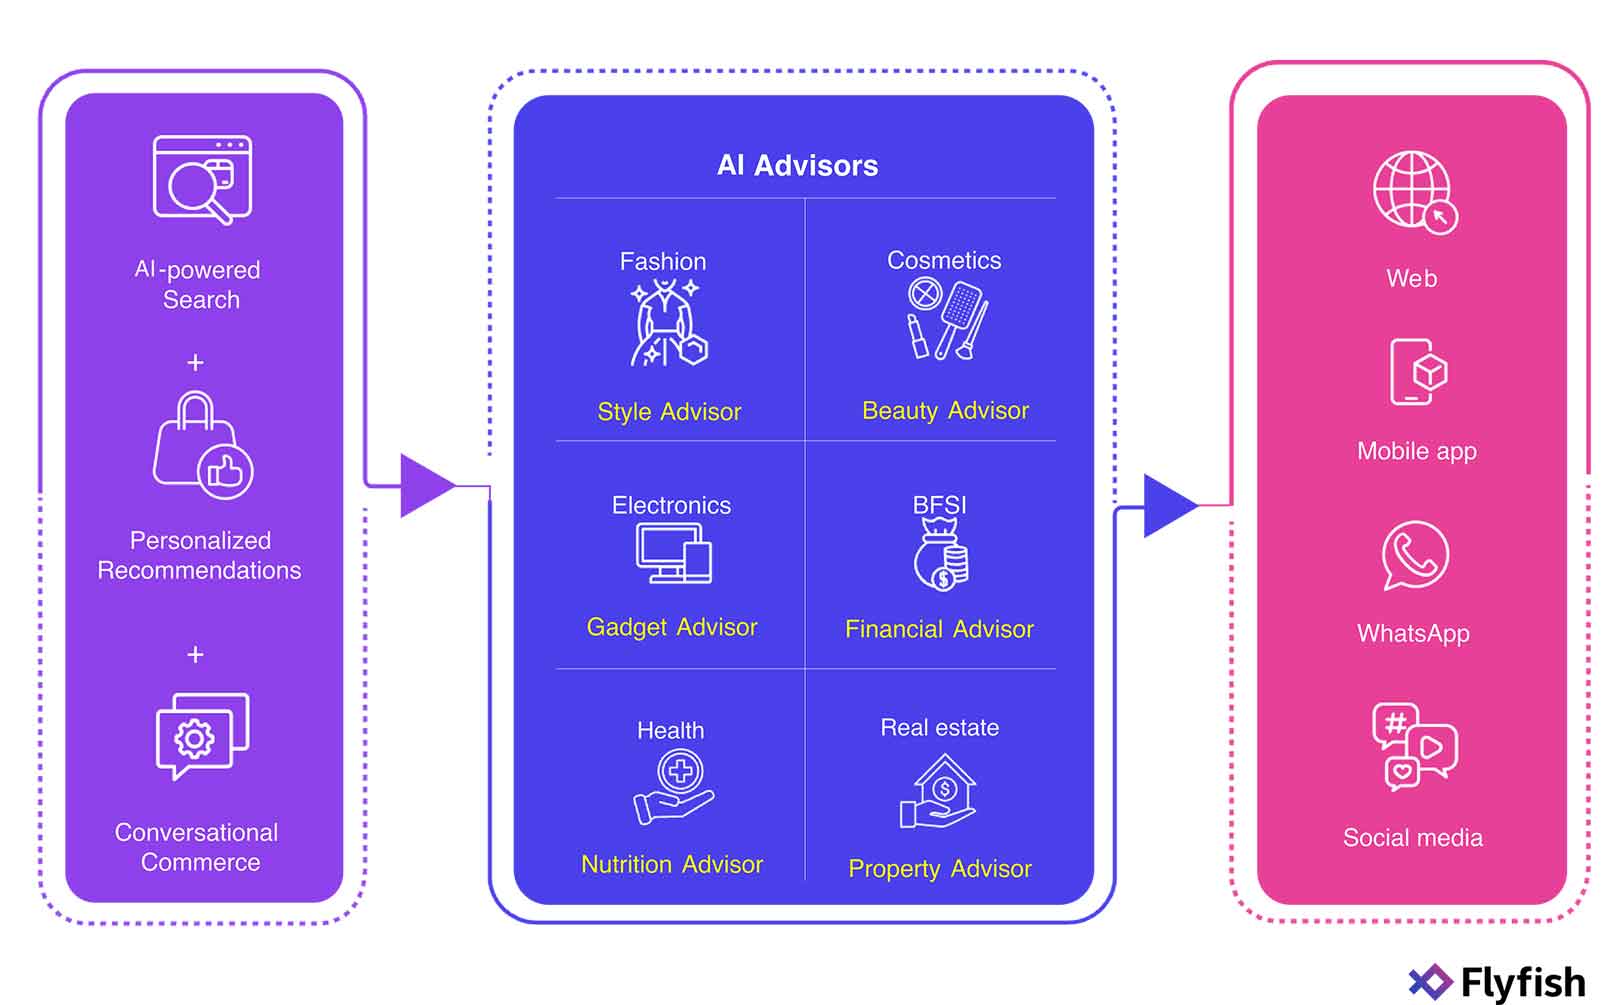 A diagram of AI advisors in different sectors and channels they operate on